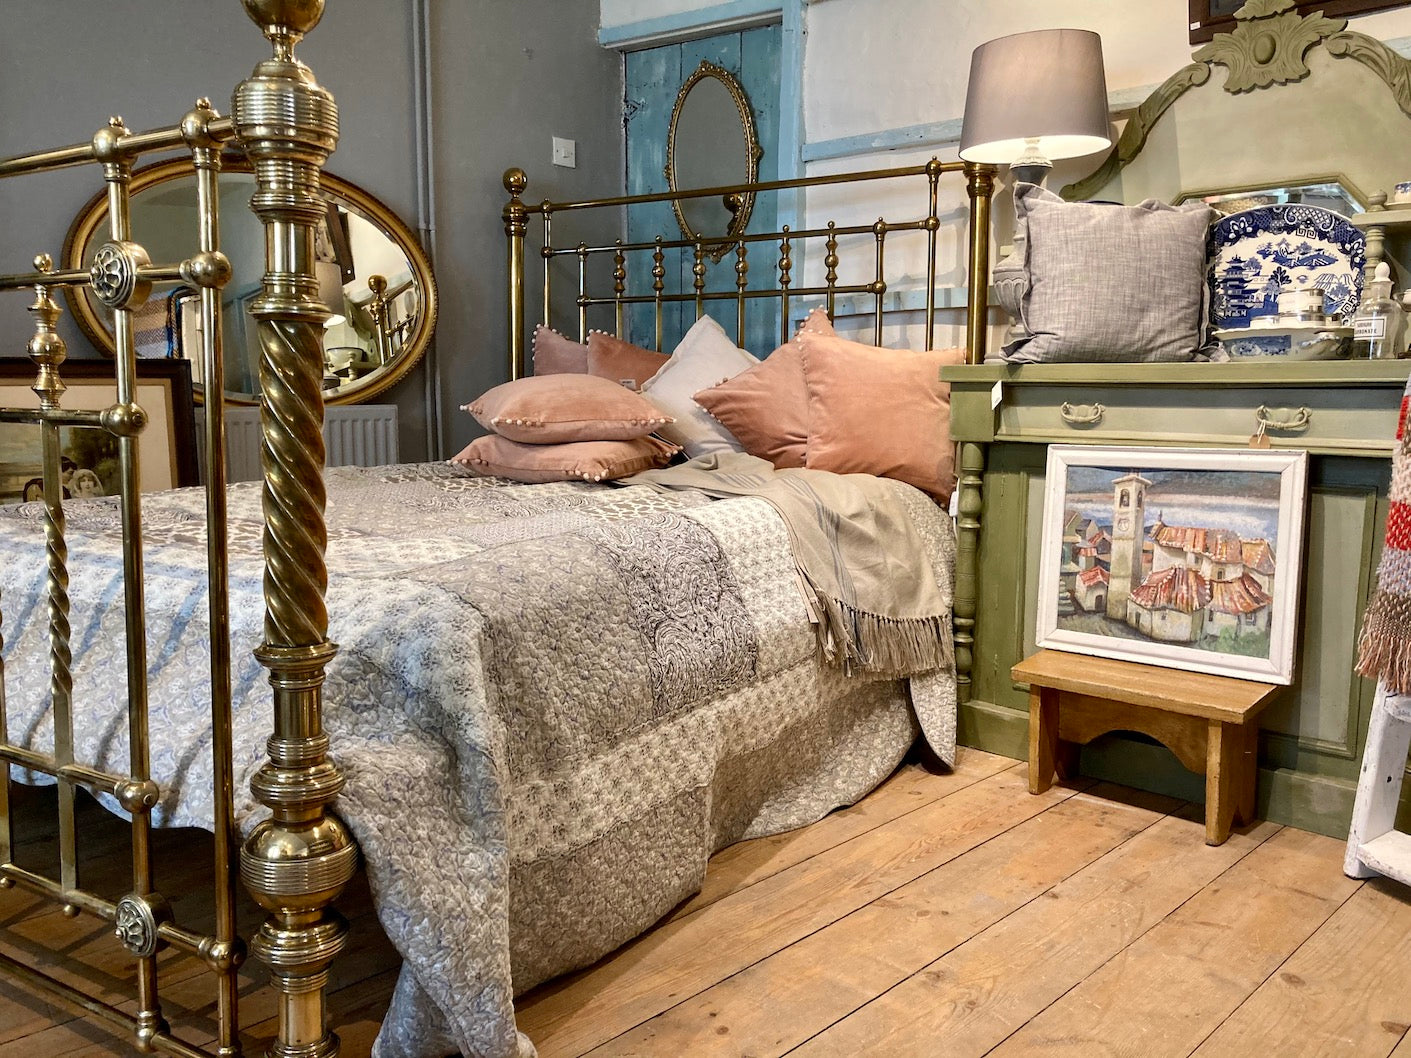 Vintage furniture and home accessories at Source for the Goose, South Molton, Devon, UK